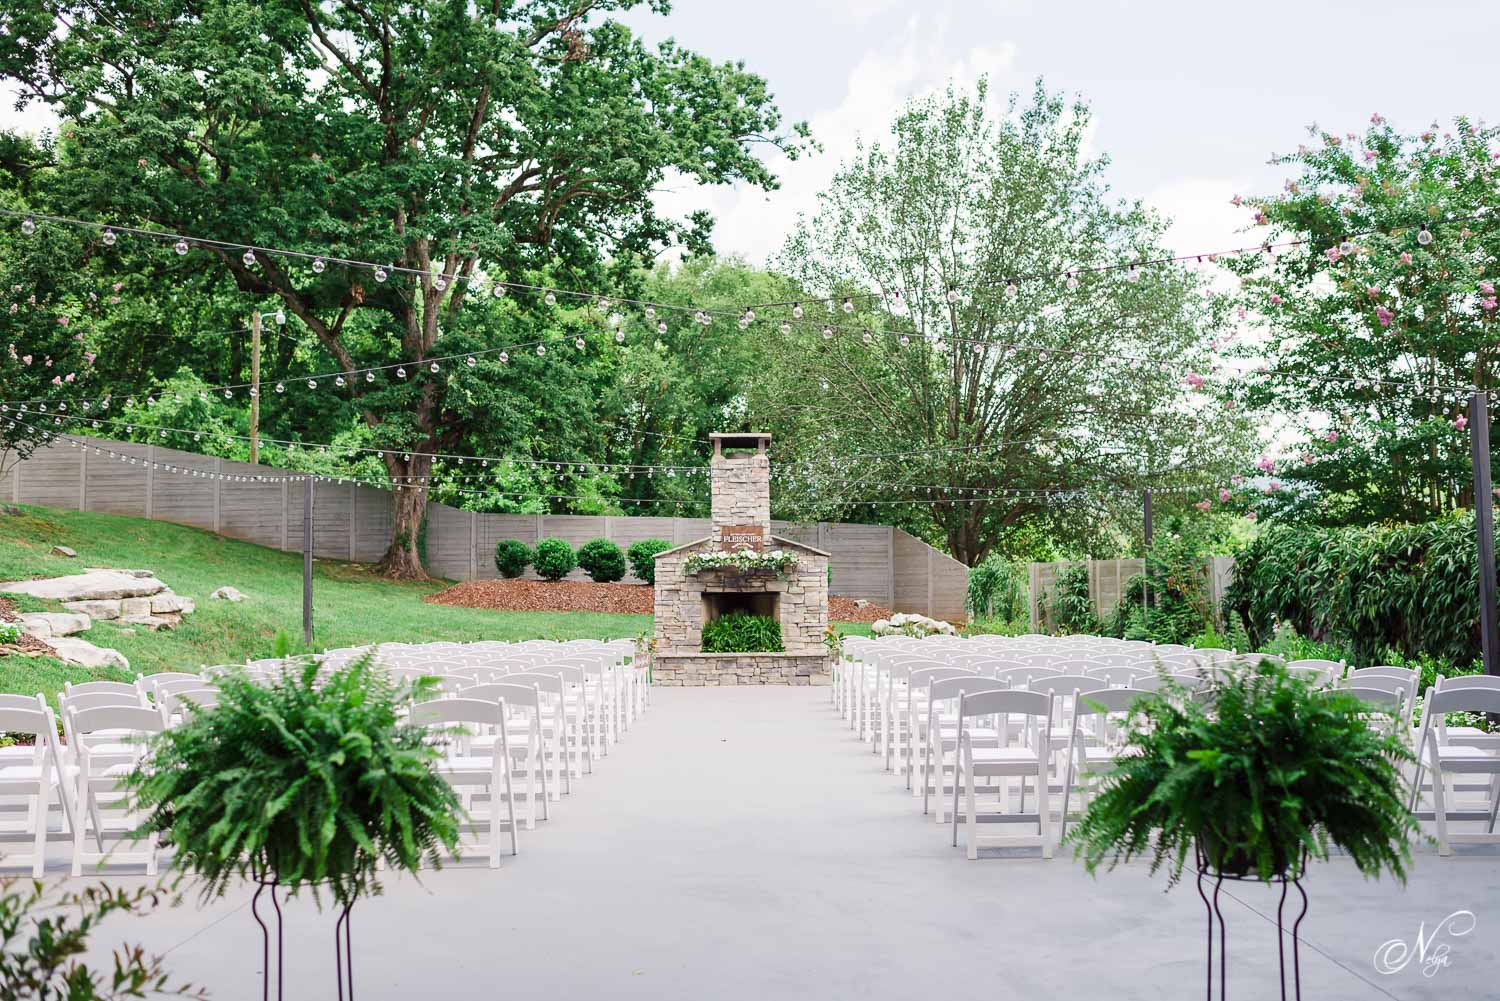 The garden ceremony option with ferns at the entrance to the aisle and all white chairs at the Venue Chattanooga in Tennessee.